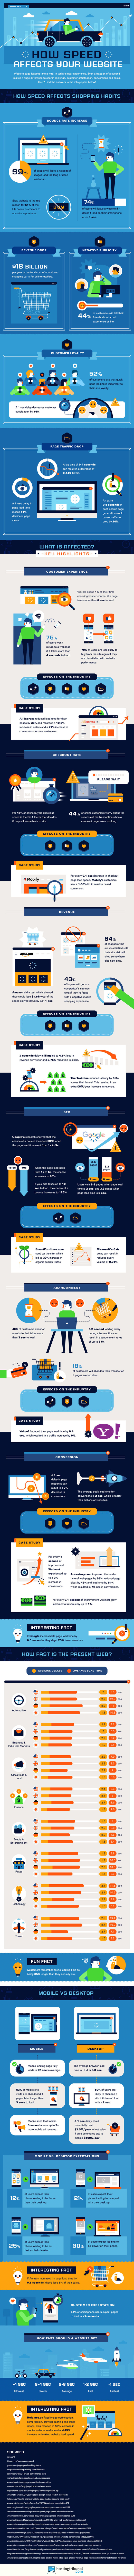 How speed affects your website - infographic